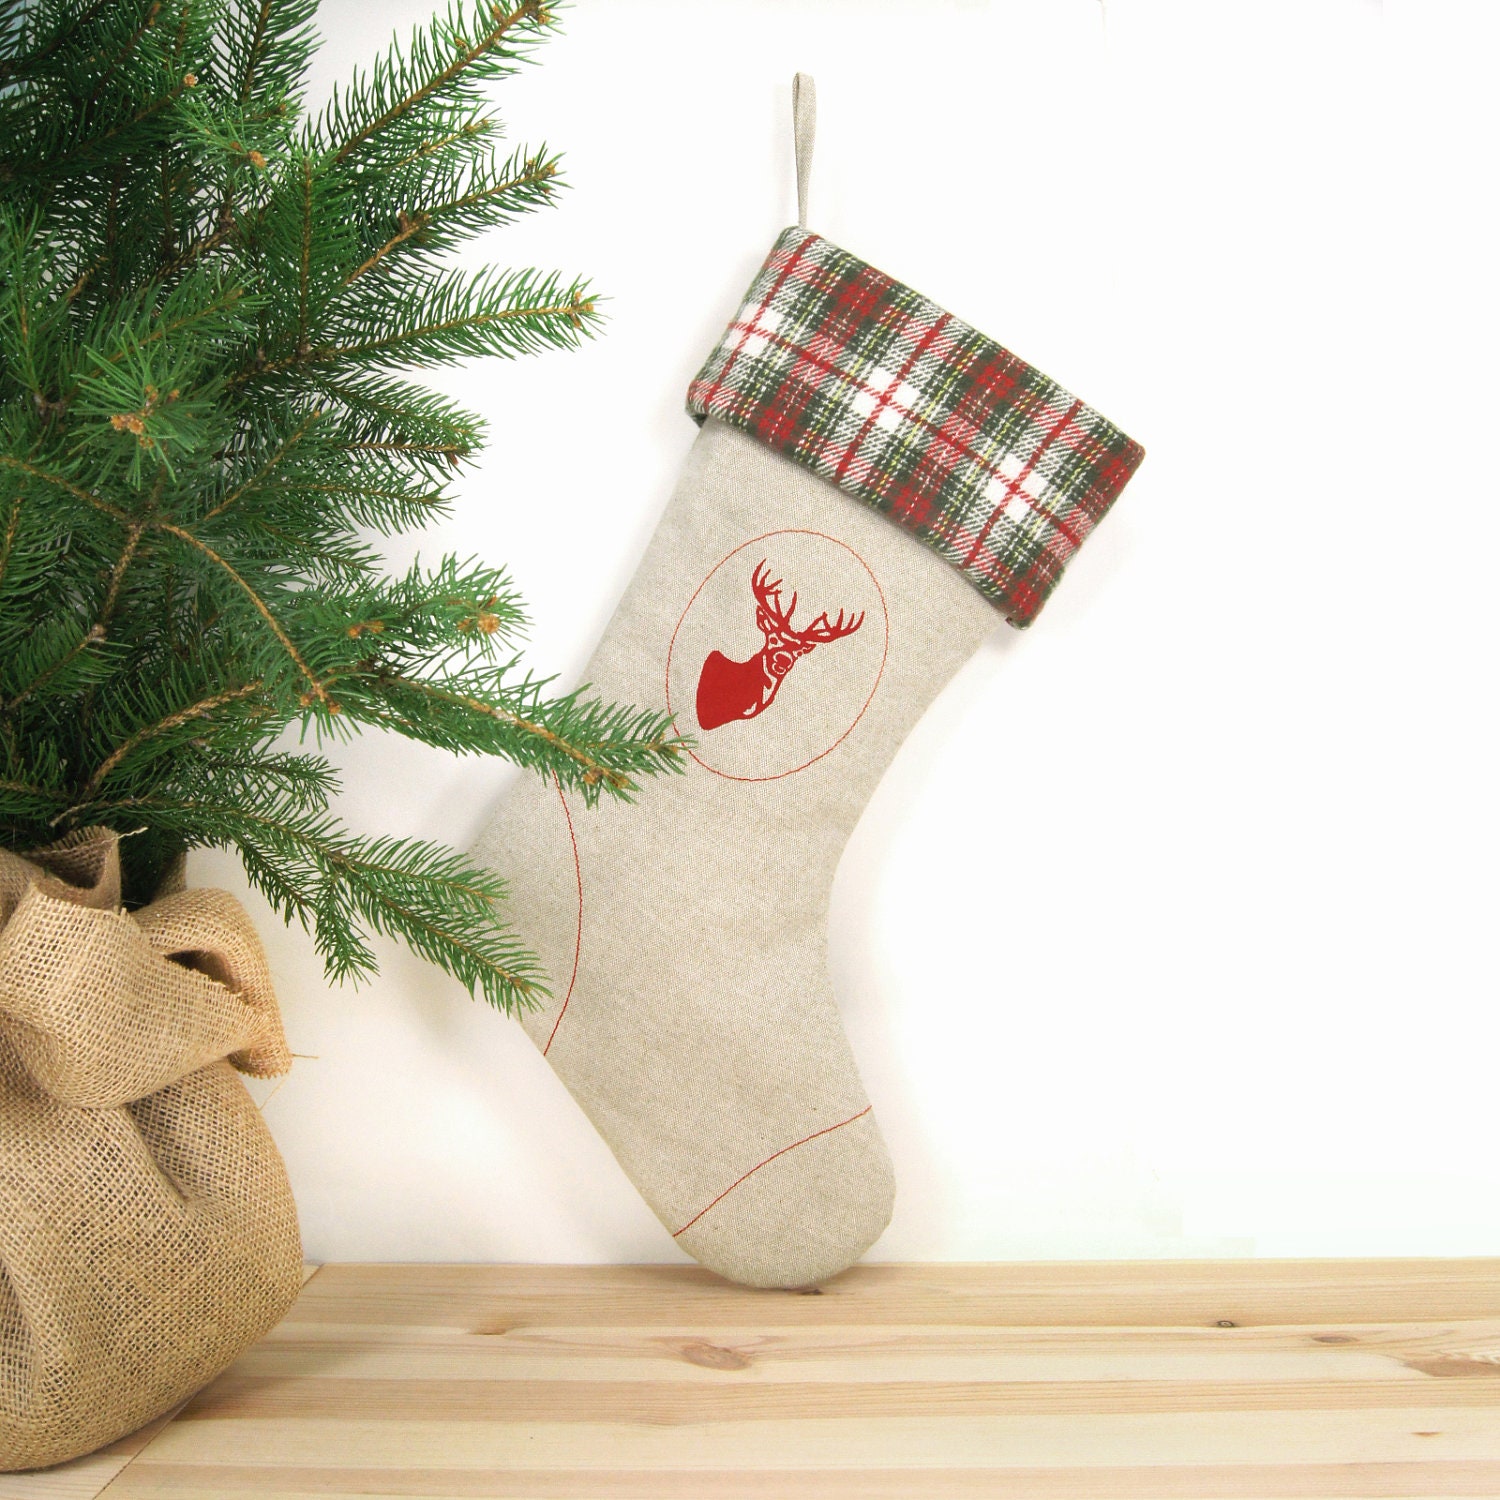 Christmas Stocking, Woodland, Rustic christmas stocking - Red deer print on natural canvas with red, green and white plaid cuff - ClassicByNature